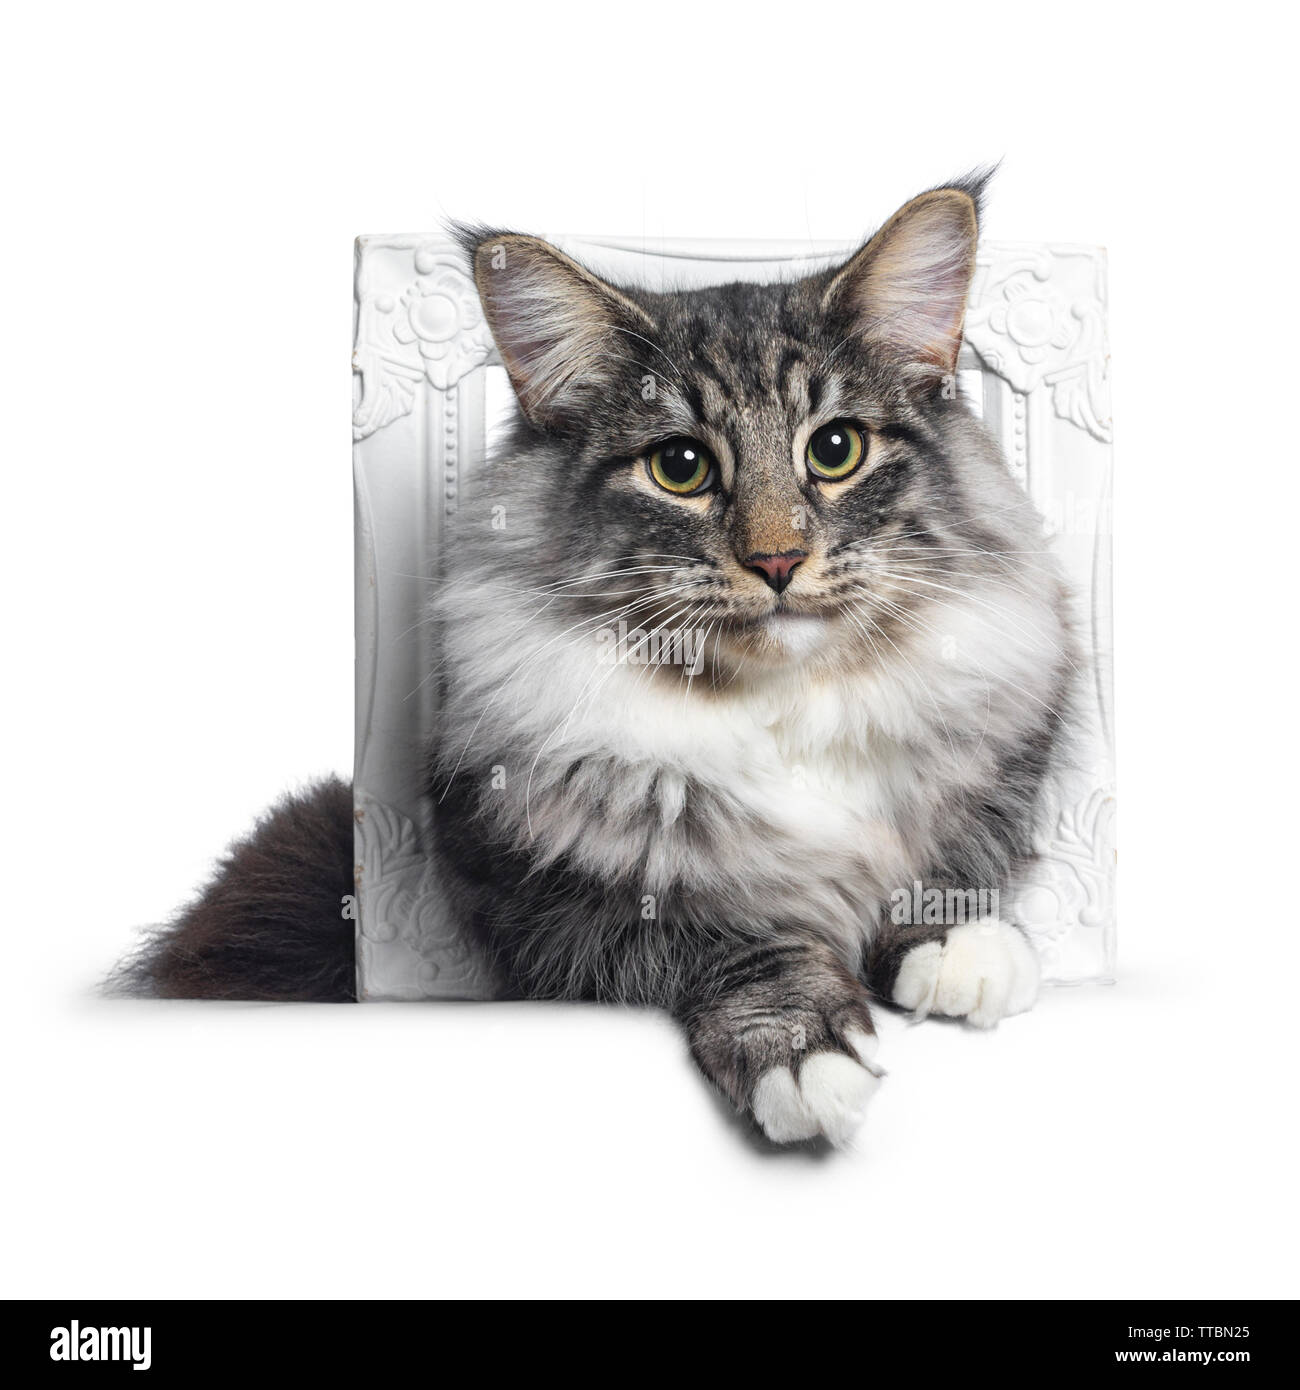 Adorable young Norwegian Forestcat, Laying with head and front paws through white photo frame. Looking curious at lens. Isolated on white background. Stock Photo